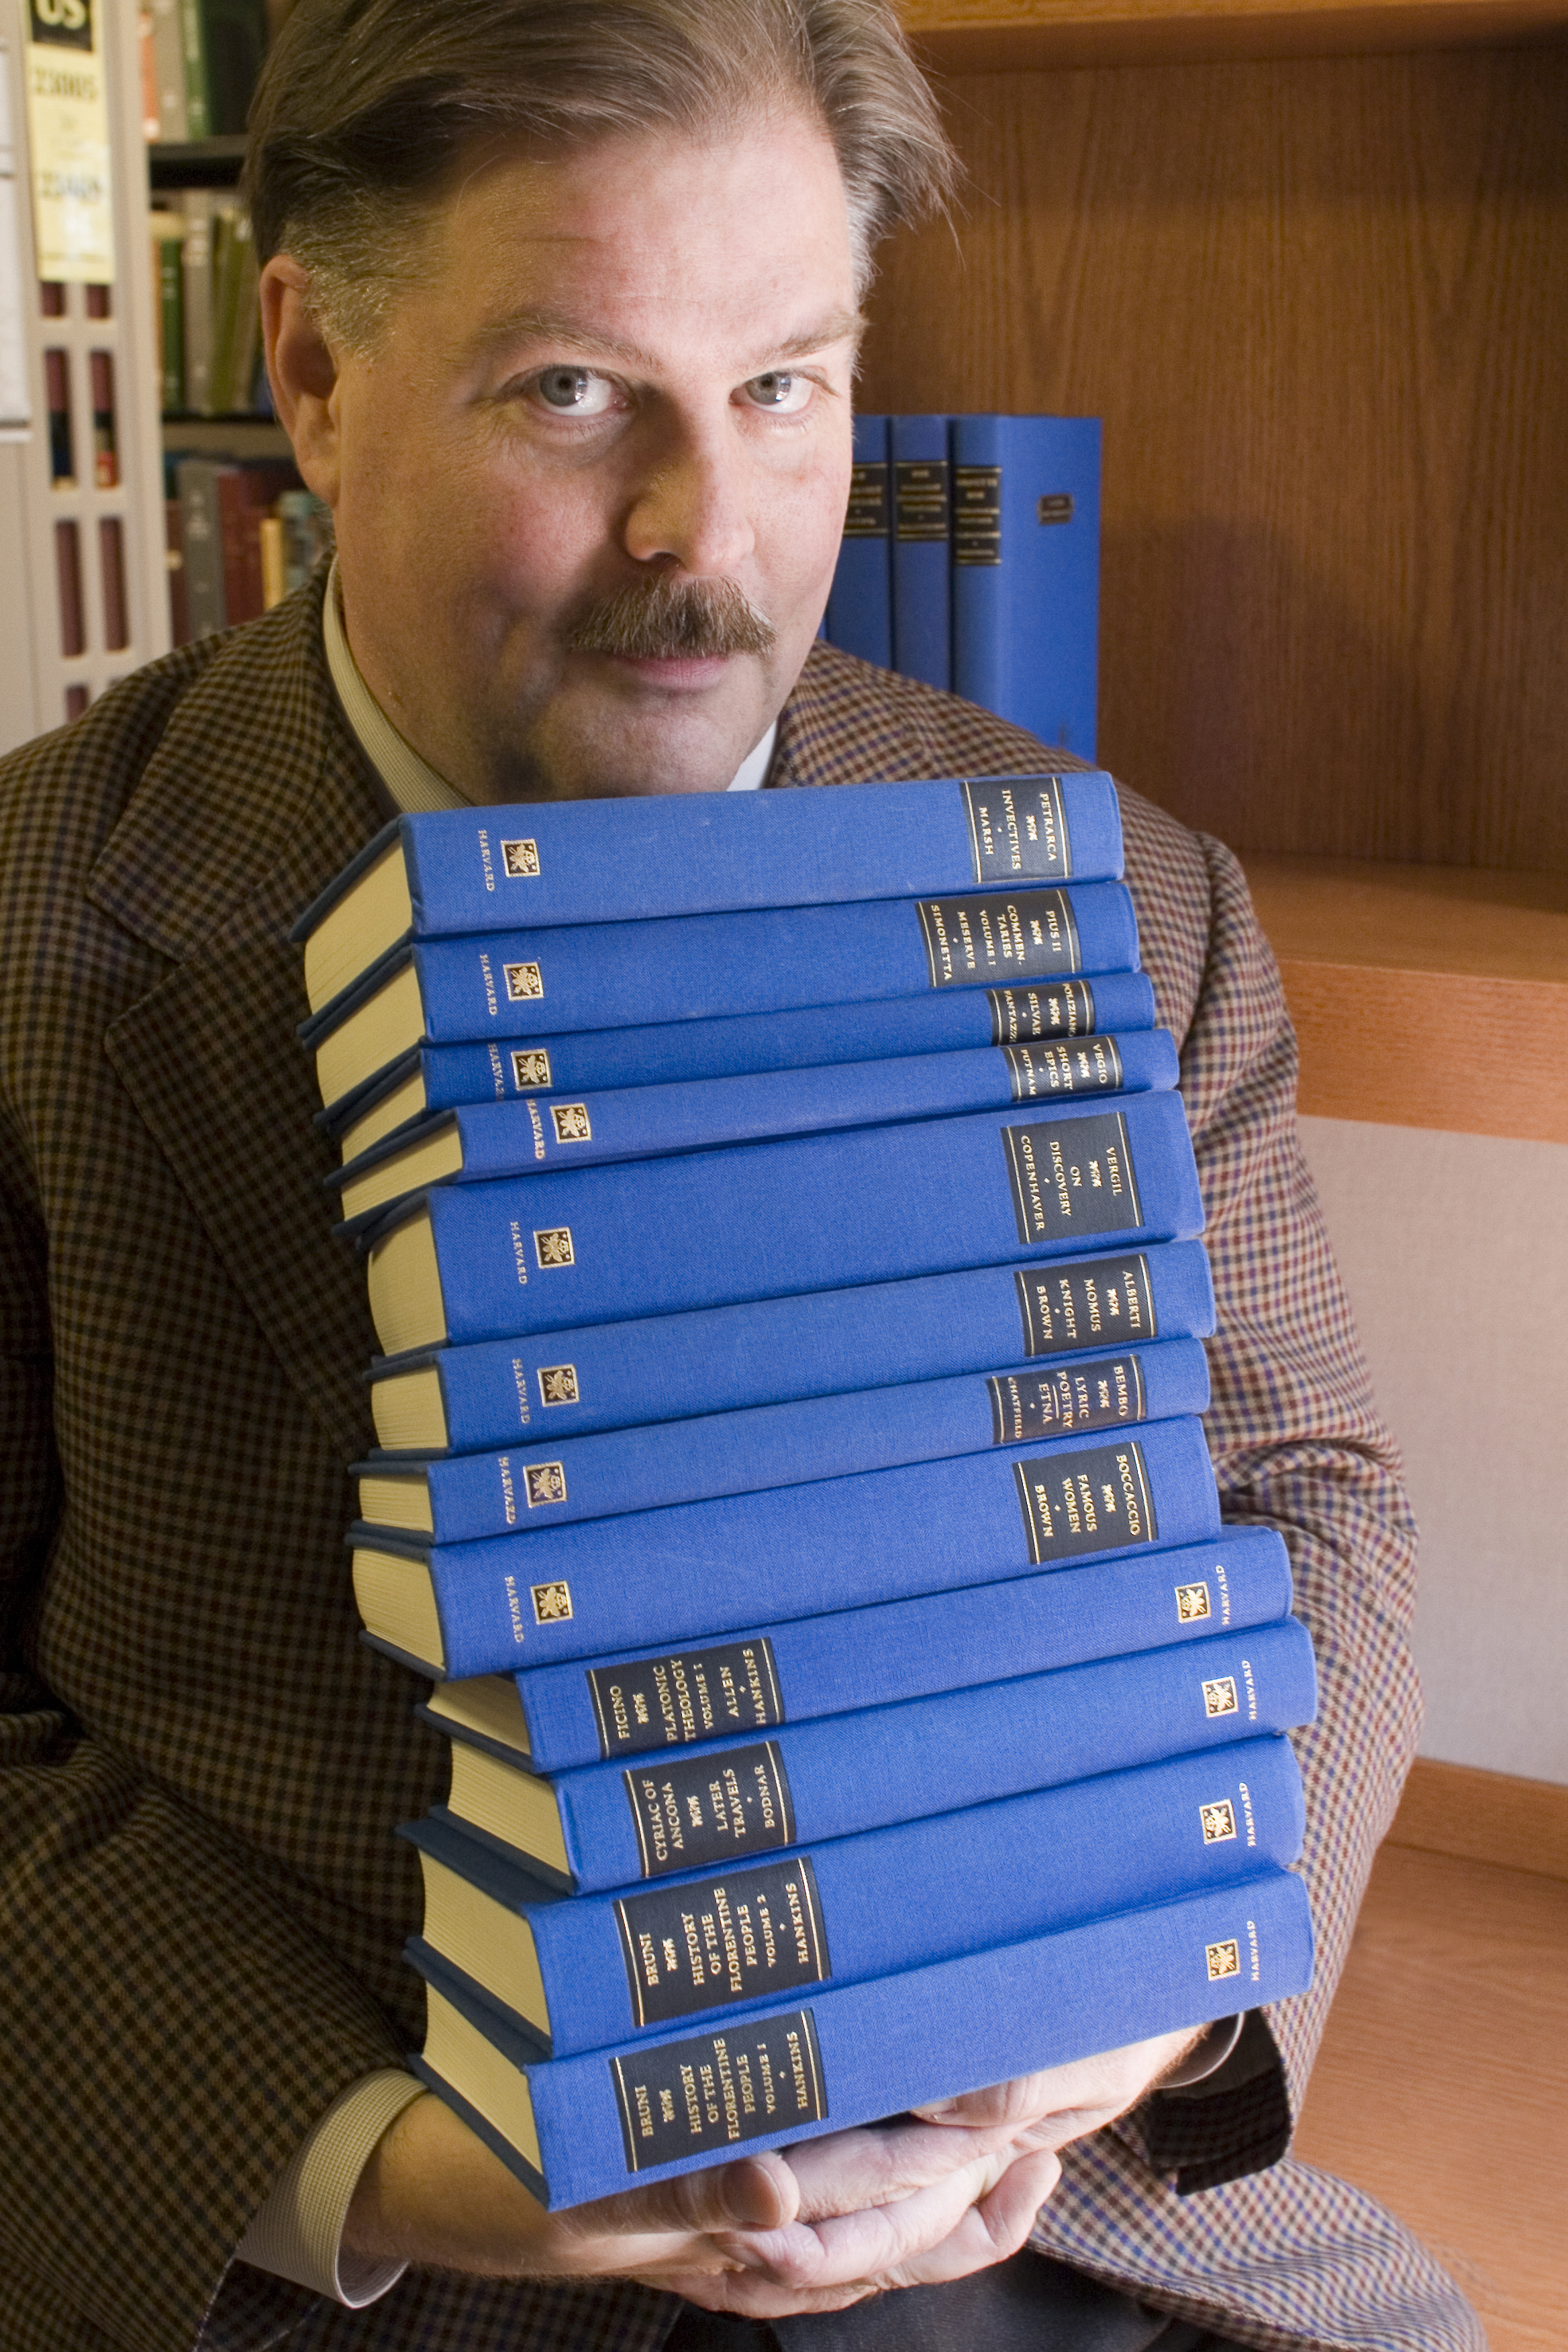 Professor James Hankins holds a collection of books from the I Tatti Renaissance Library